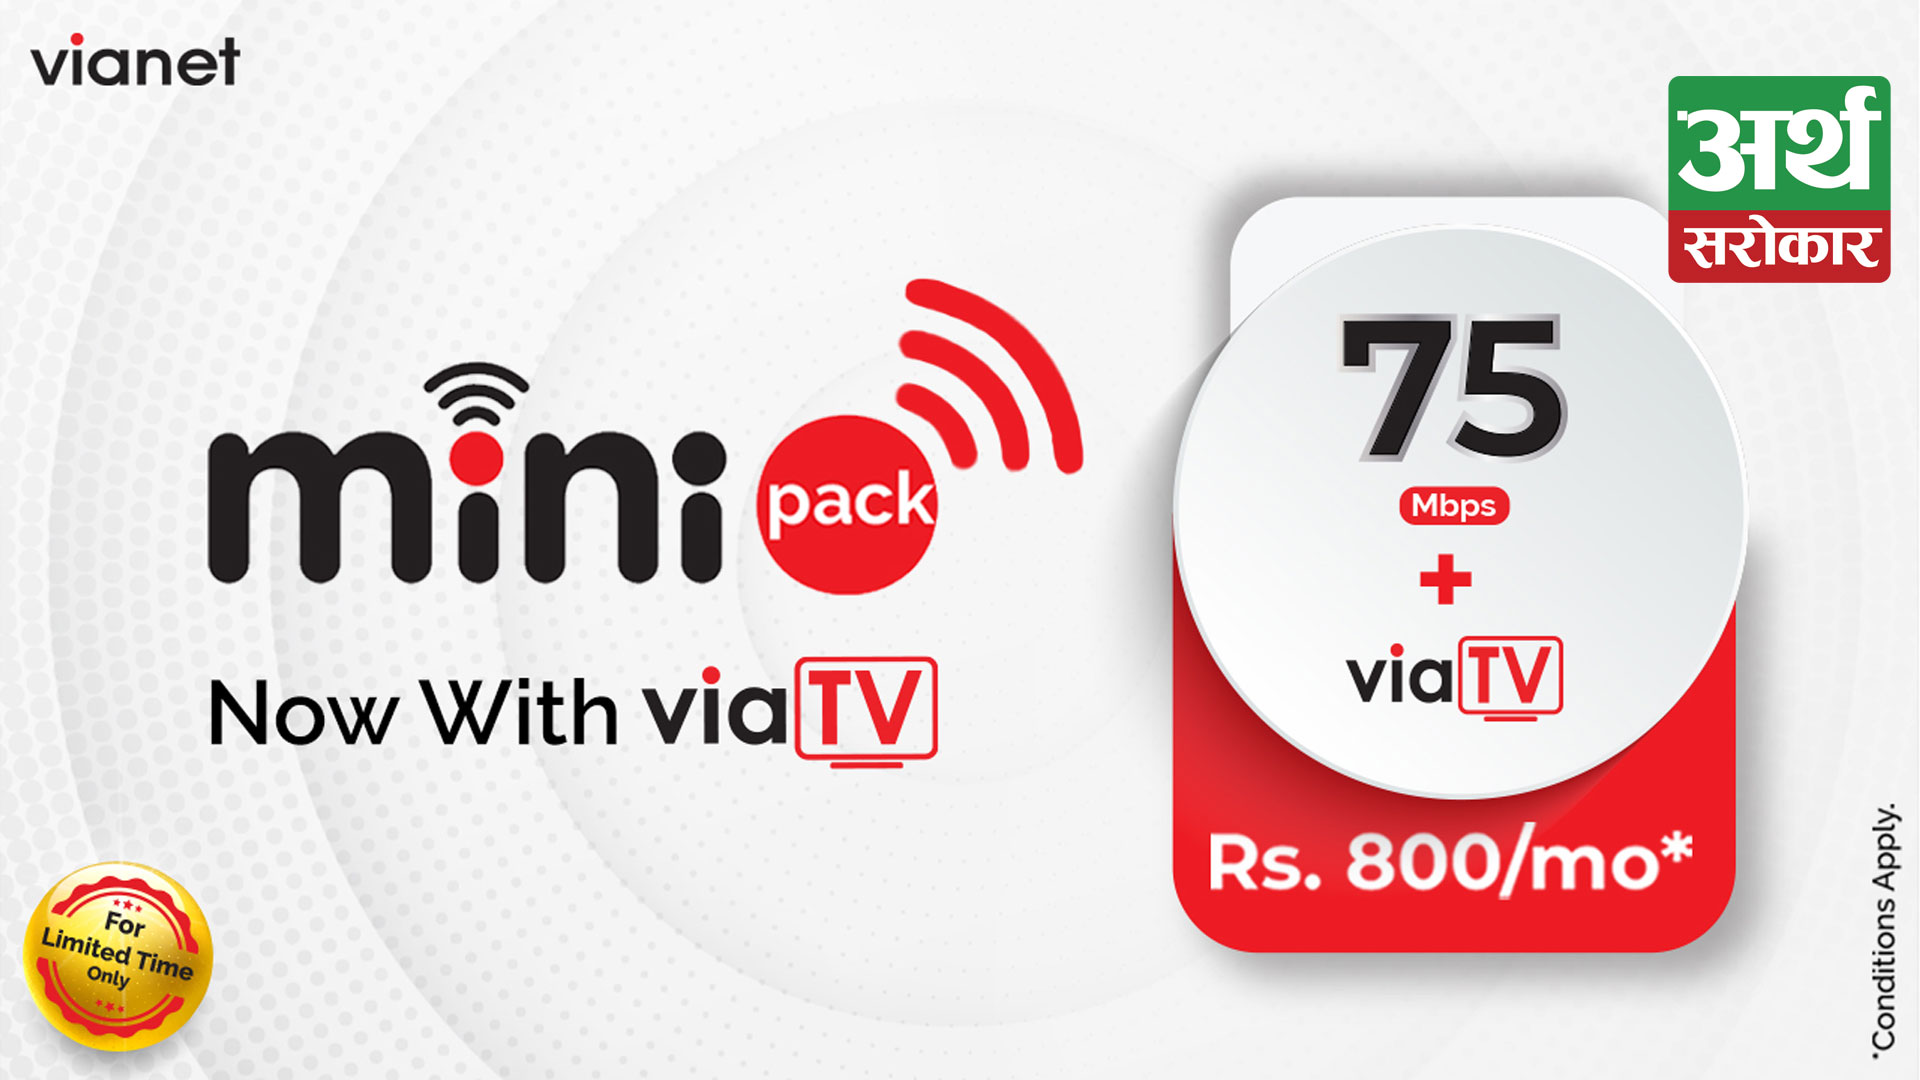 A combo offer of 75 Mbps Internet and ViaTV at Rs 800 per month